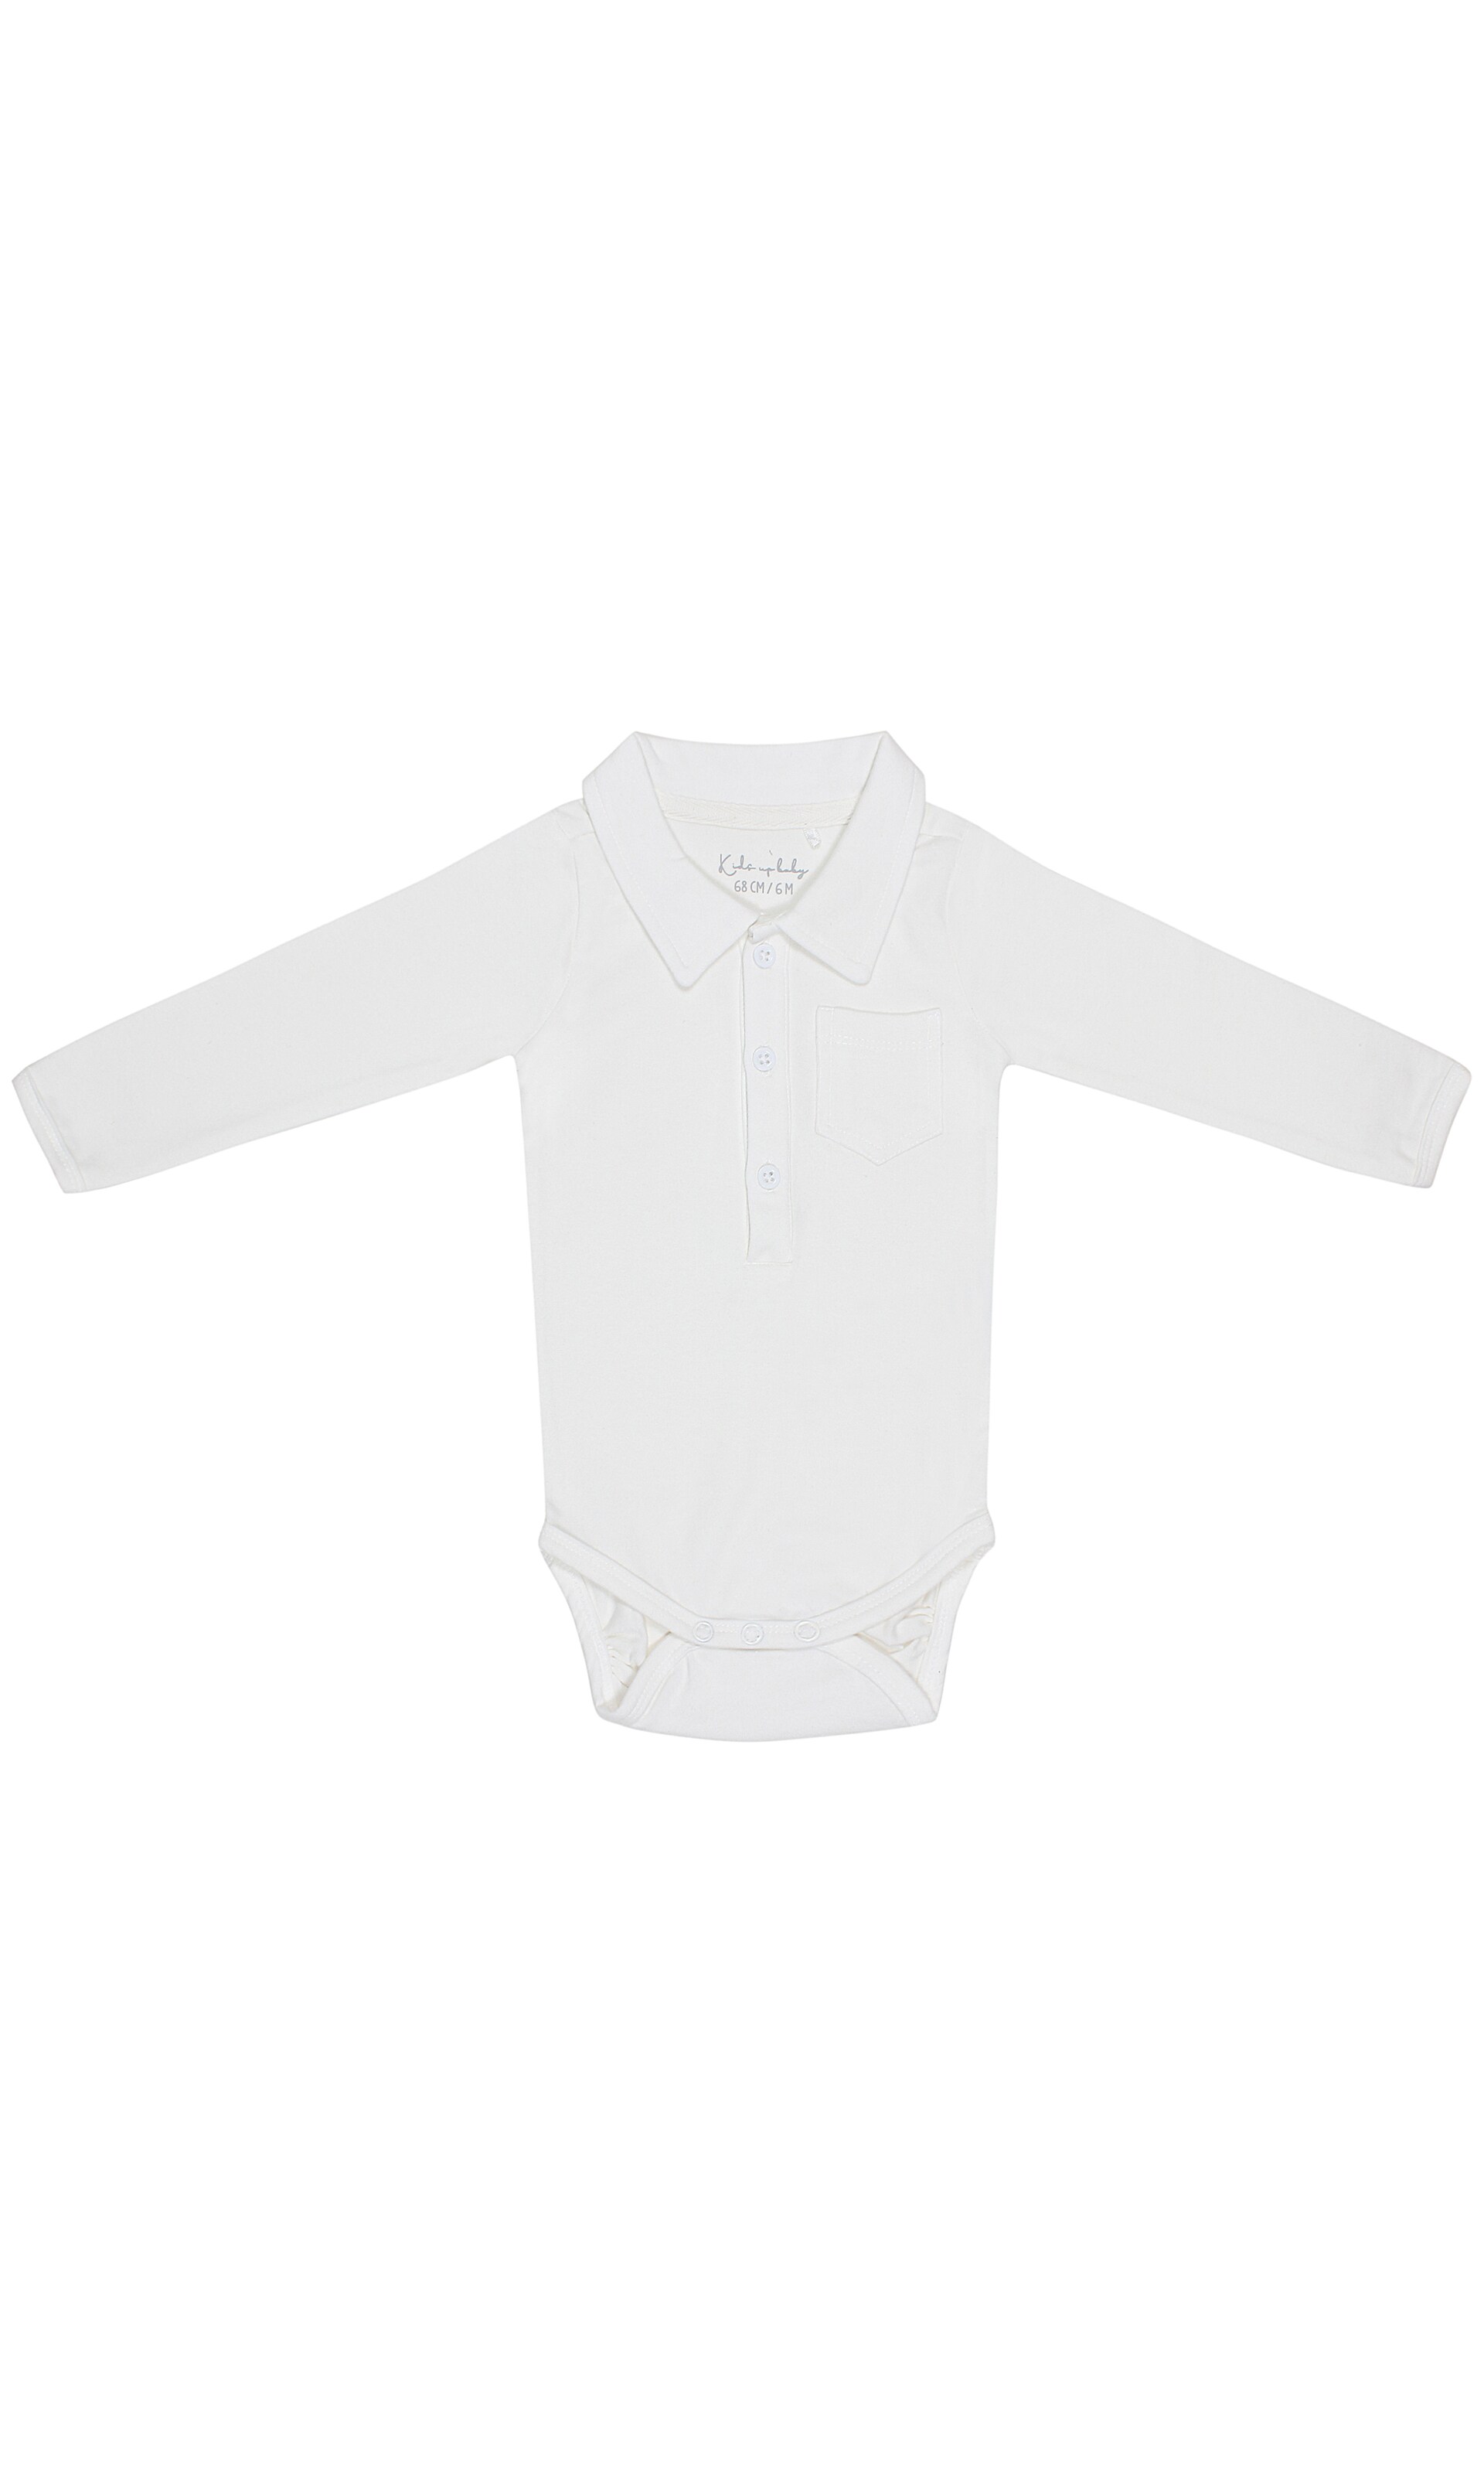 Kids Up Barboteuse / Body 50 Blanc